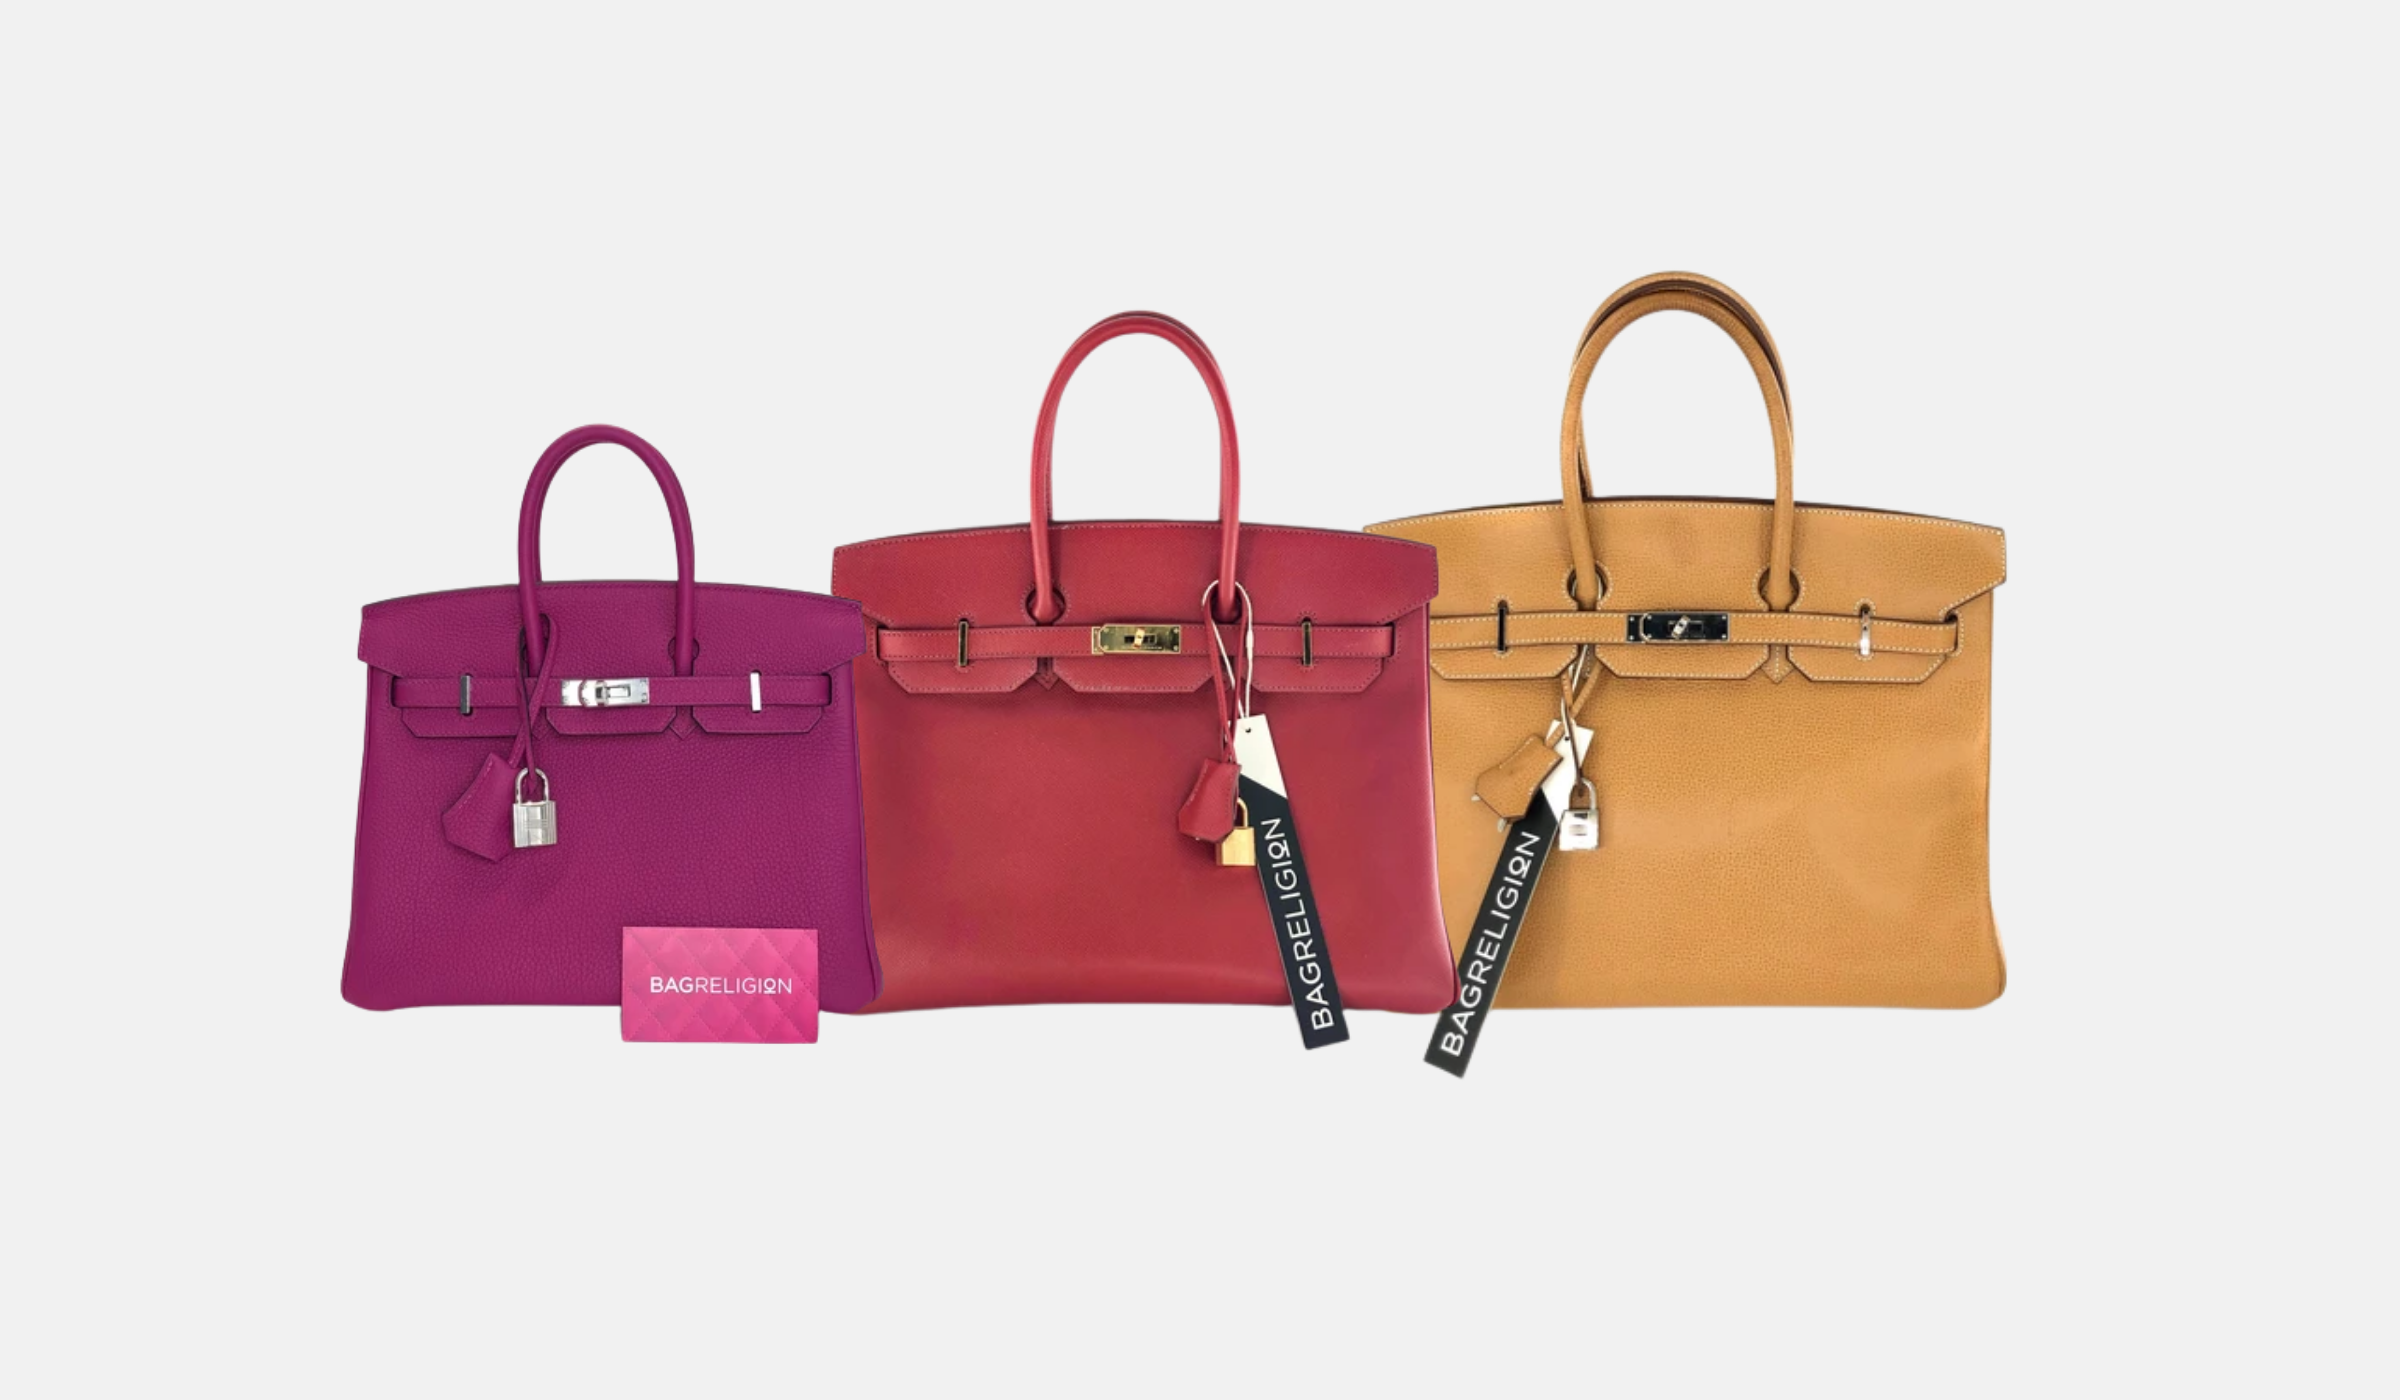 Hermes Birkin Sizes: All You Need to Know + Size Comparison!